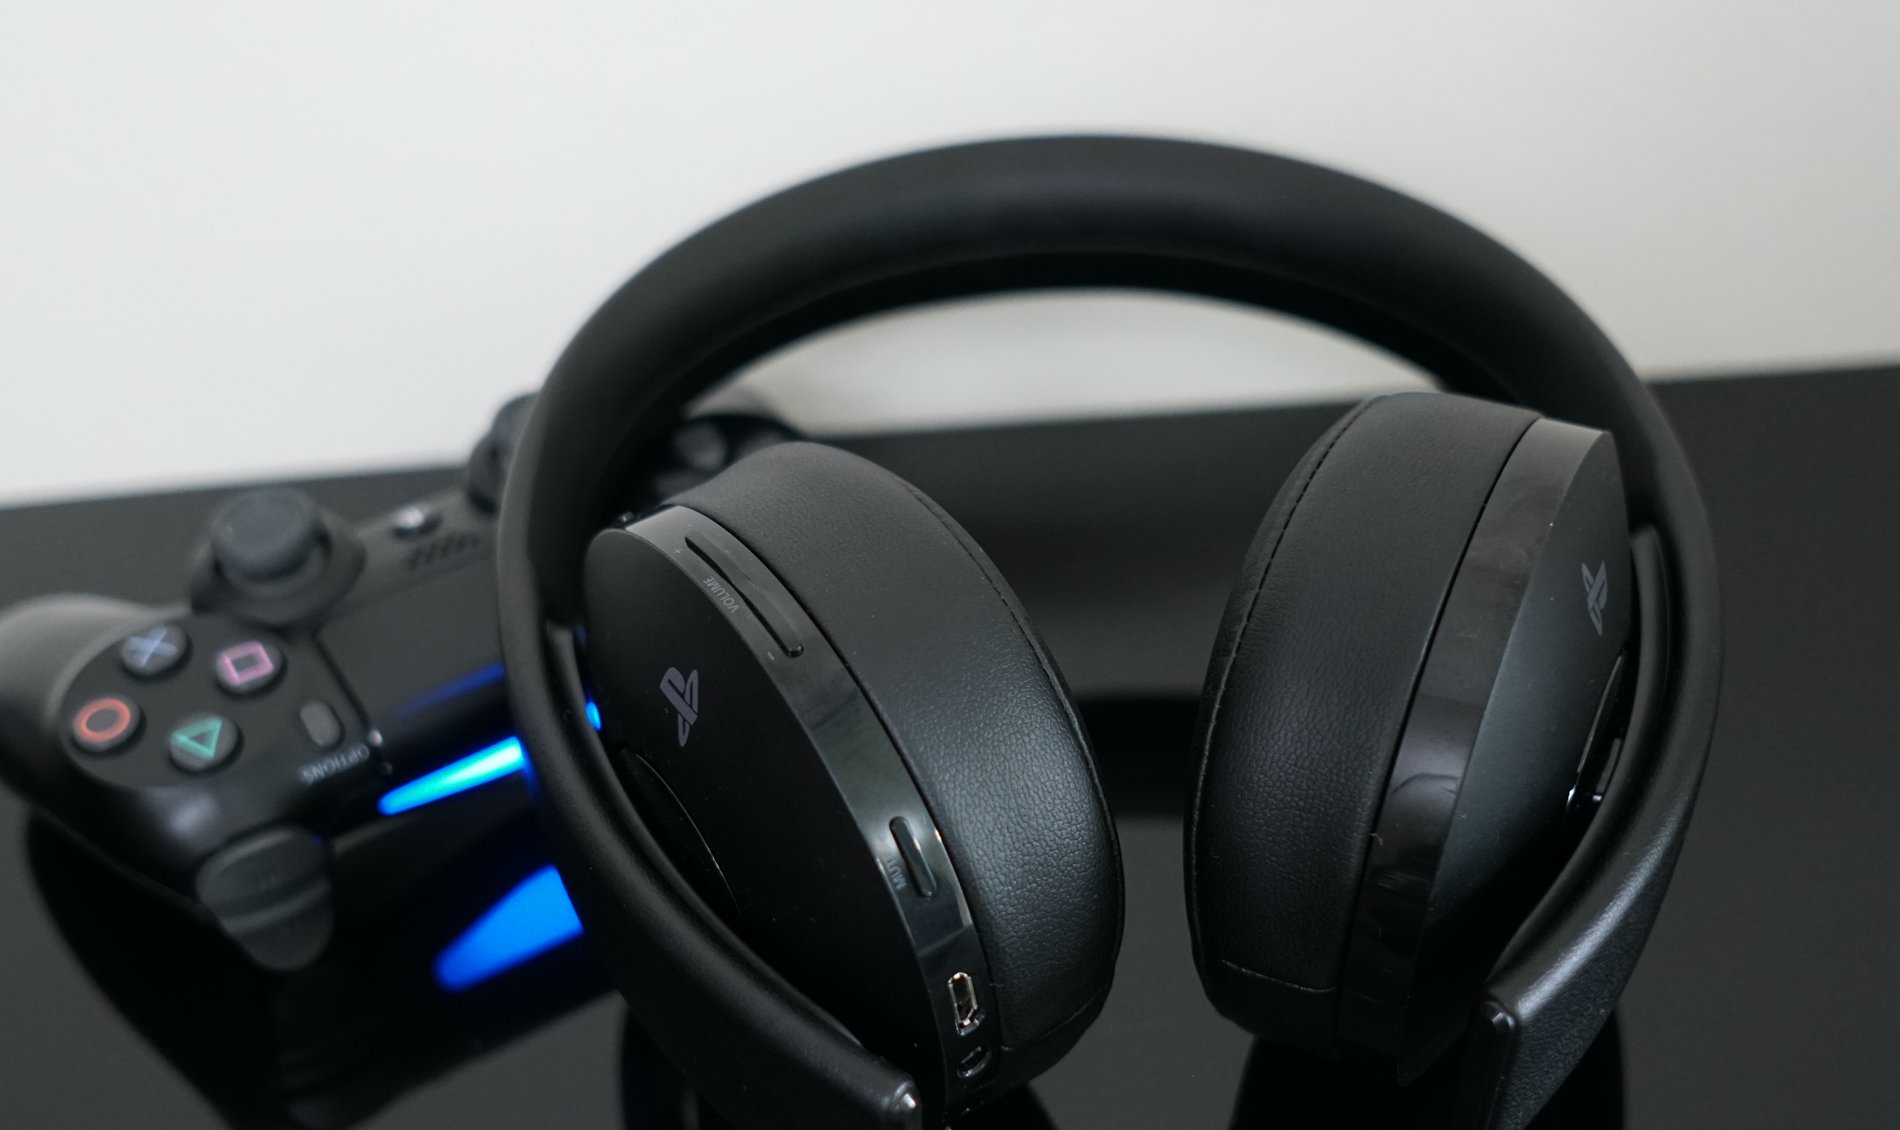 How to Connect Bluetooth Headphones to a PS4 | Digital Trends